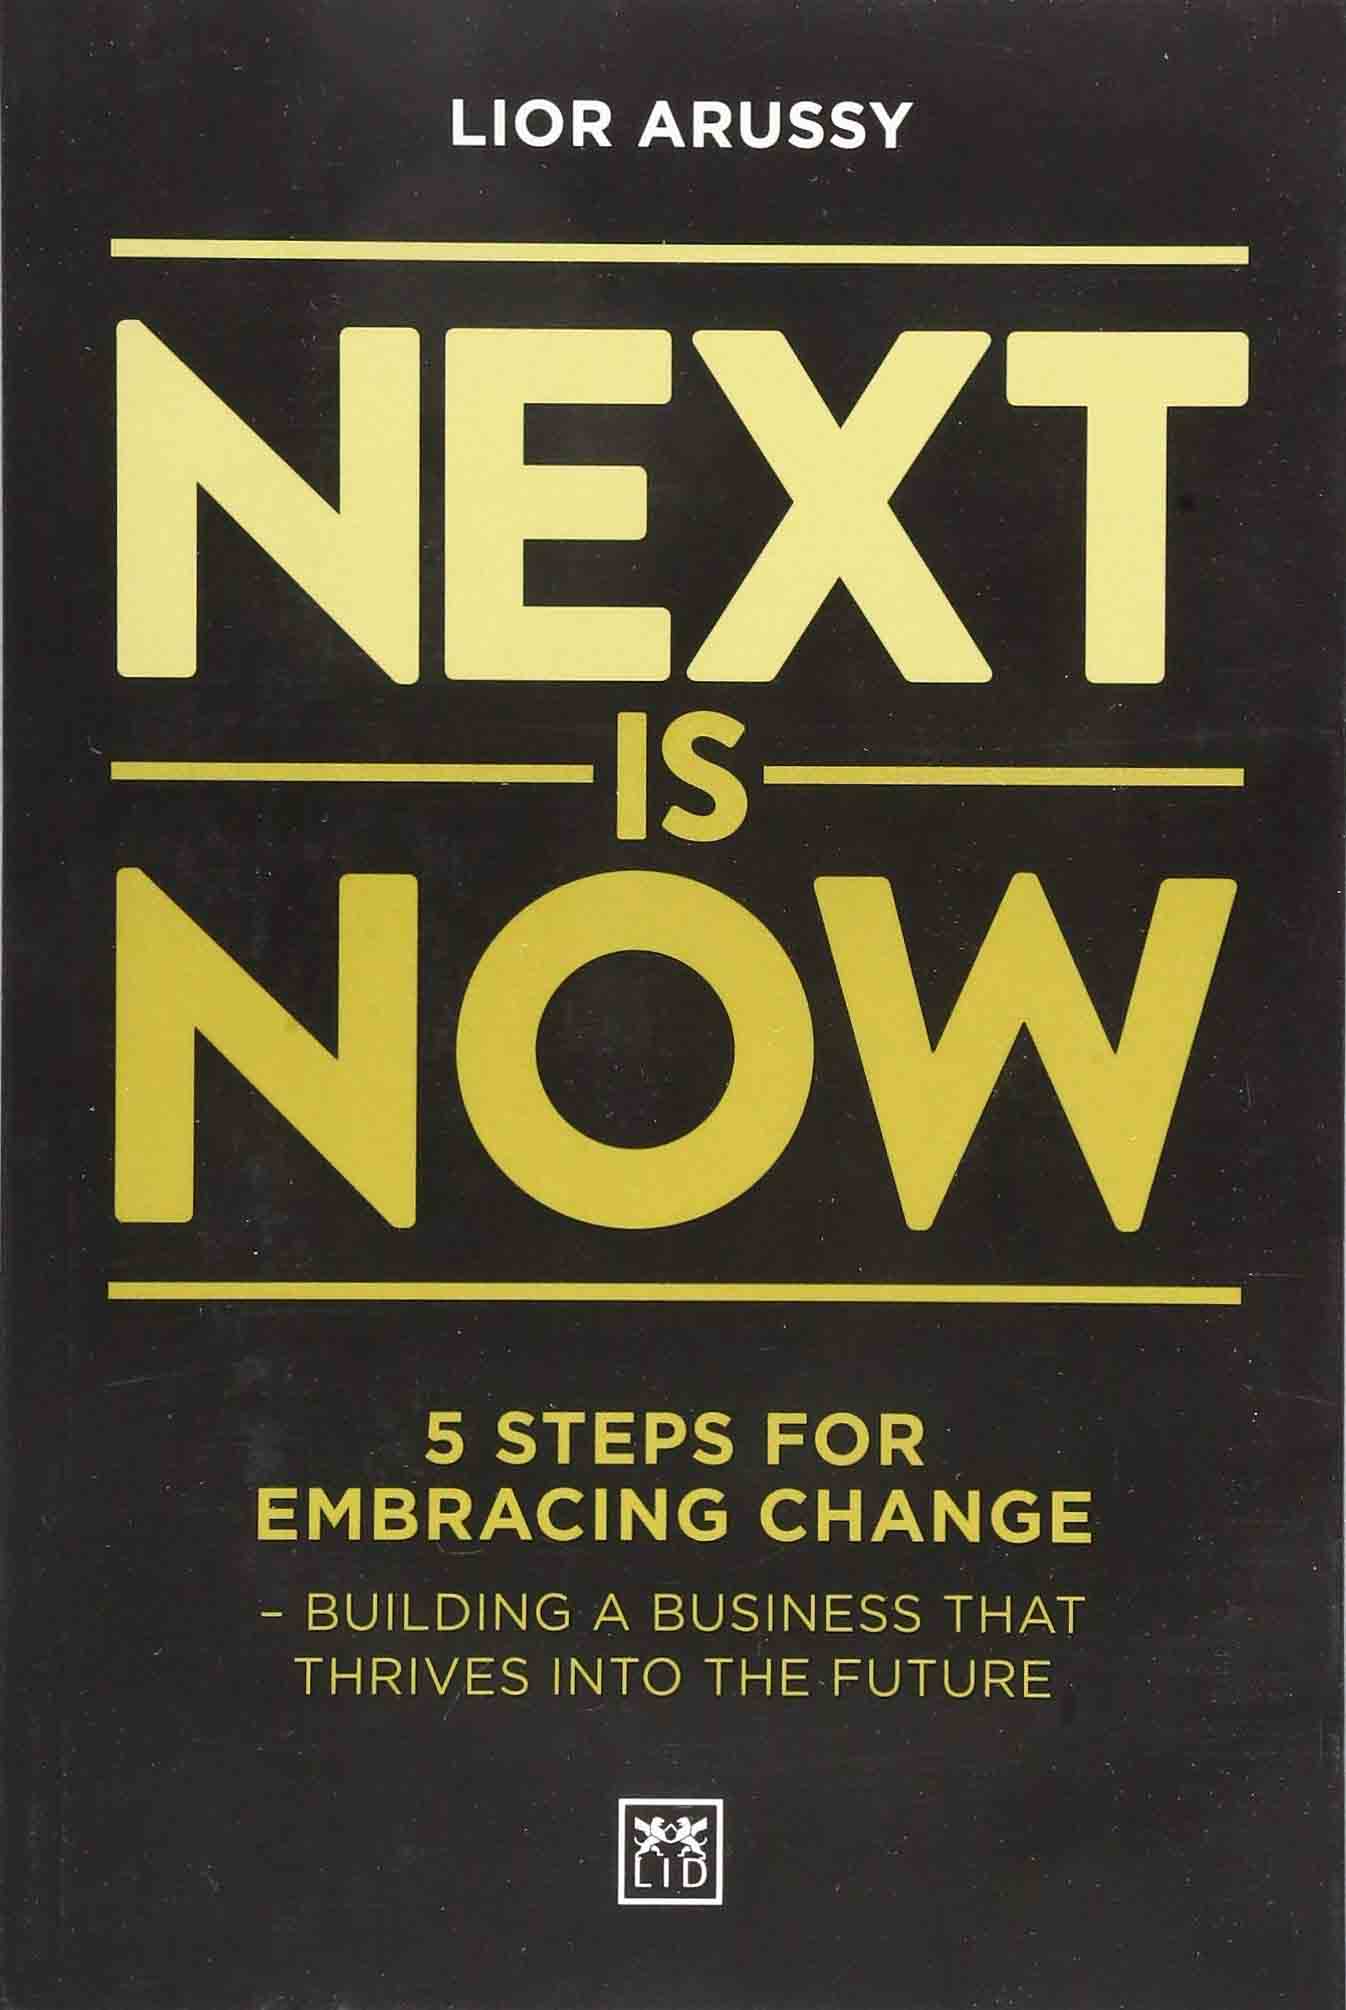 Next is Now: 5 Steps for Embracing Change – Building a Business that Thrives into the Future by Lior Arussy